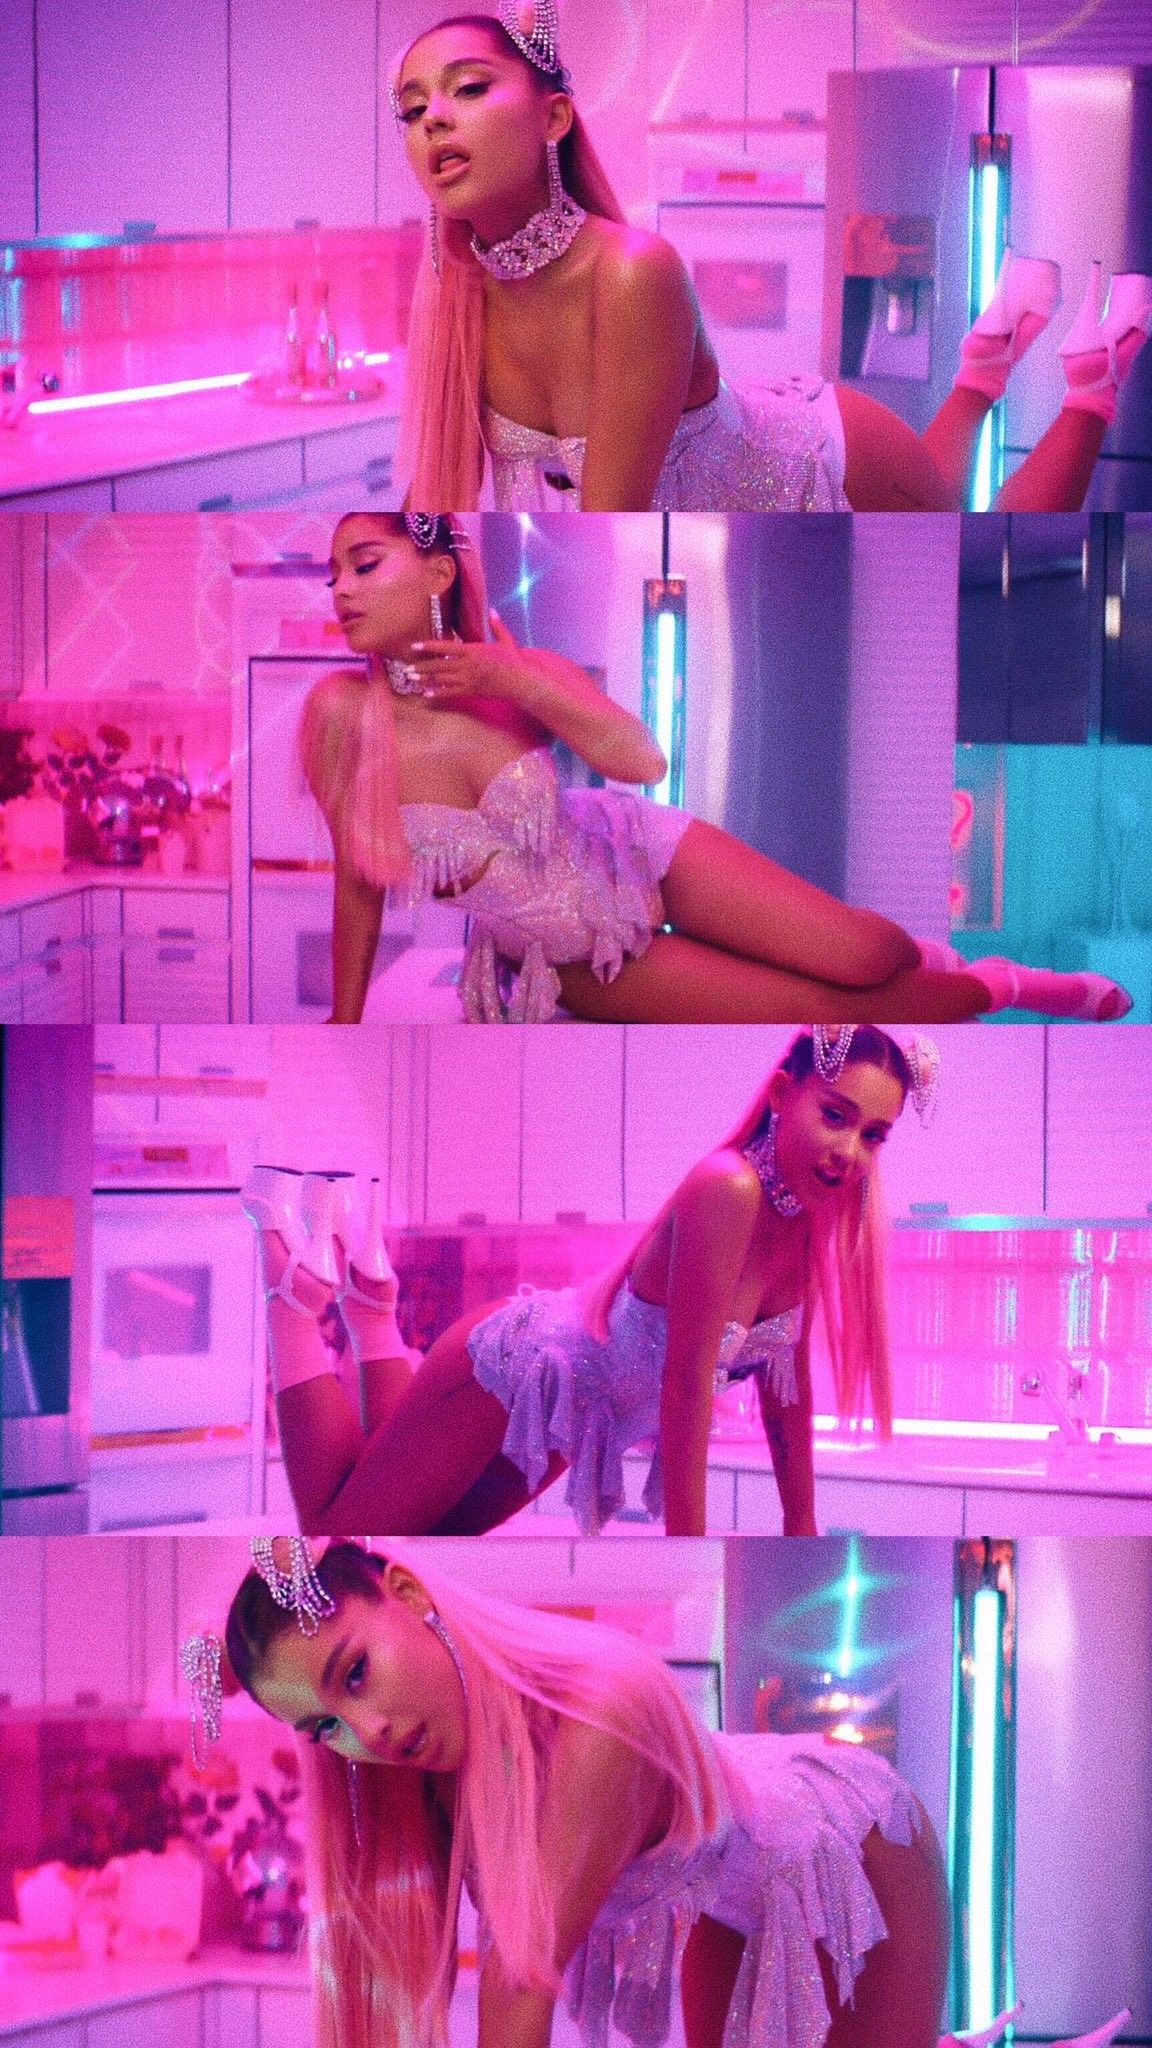 The fappening ariana grande